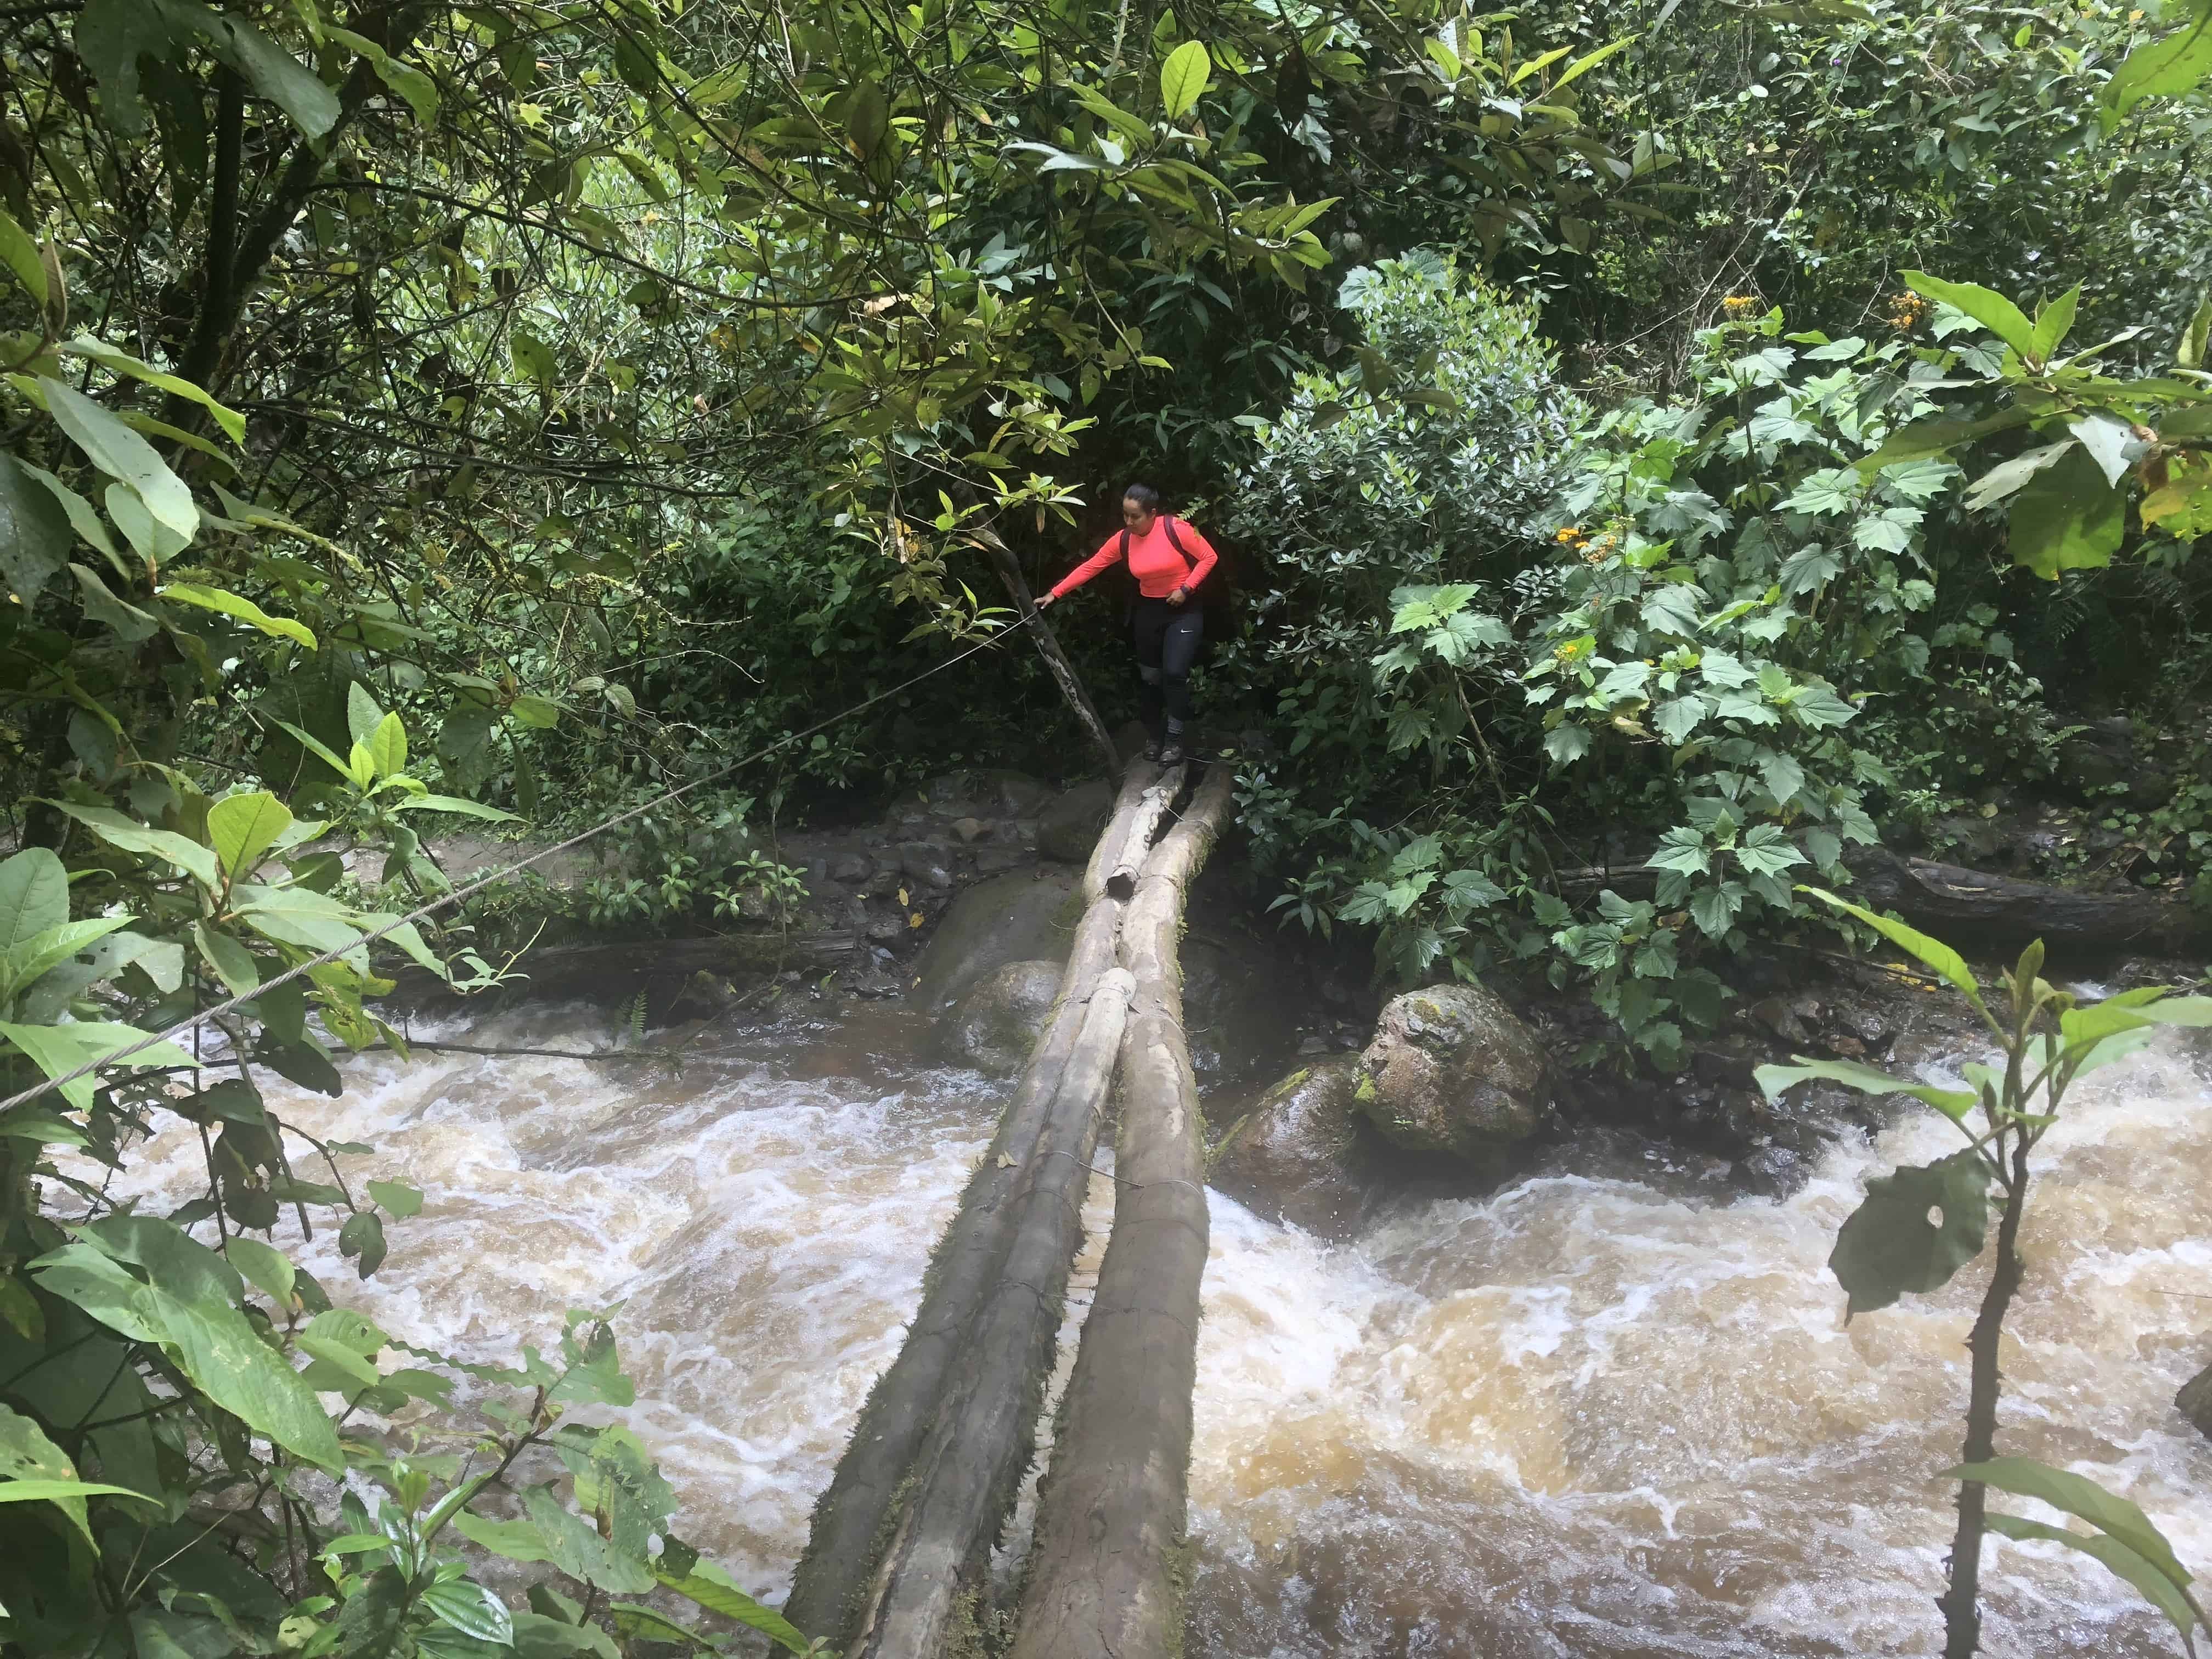 Marisol crossing over the river at Cocora Valley in Quindío, Colombia